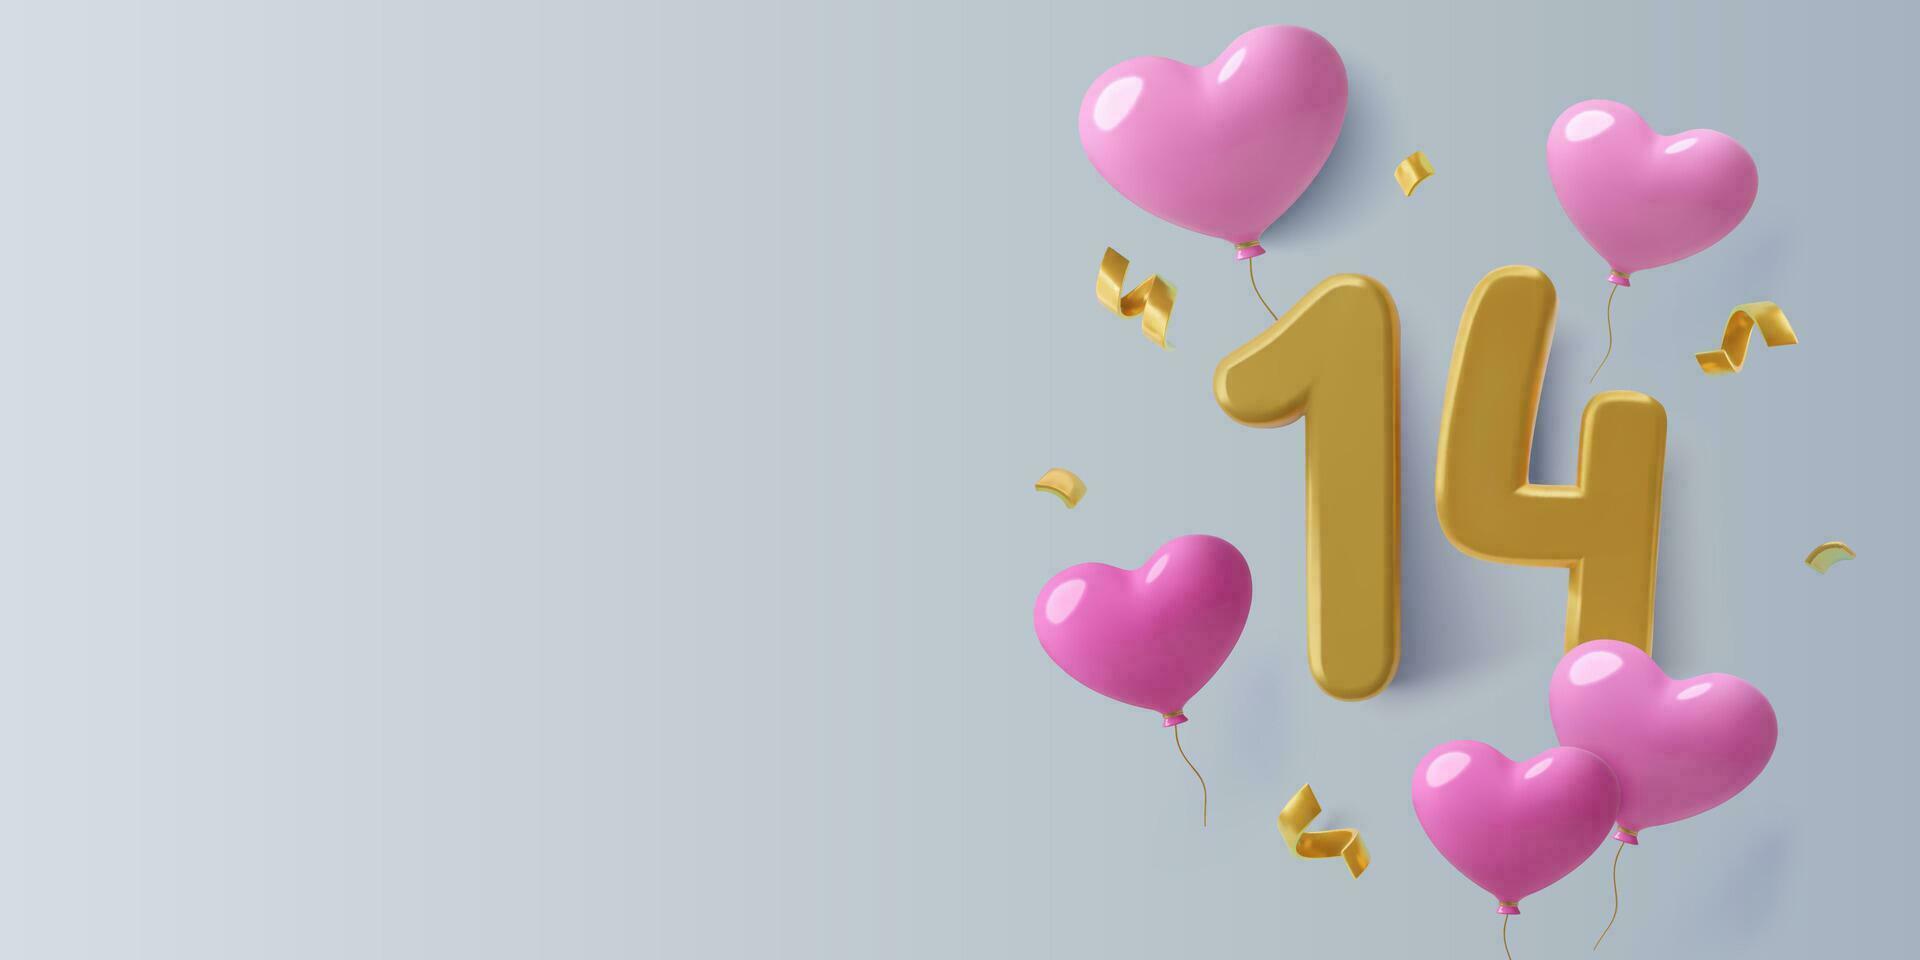 February 14 party background with number 14, heart balloons, holiday confetti and copy space. Valentine's Day realistic three dimensional banner design. Vector illustration.